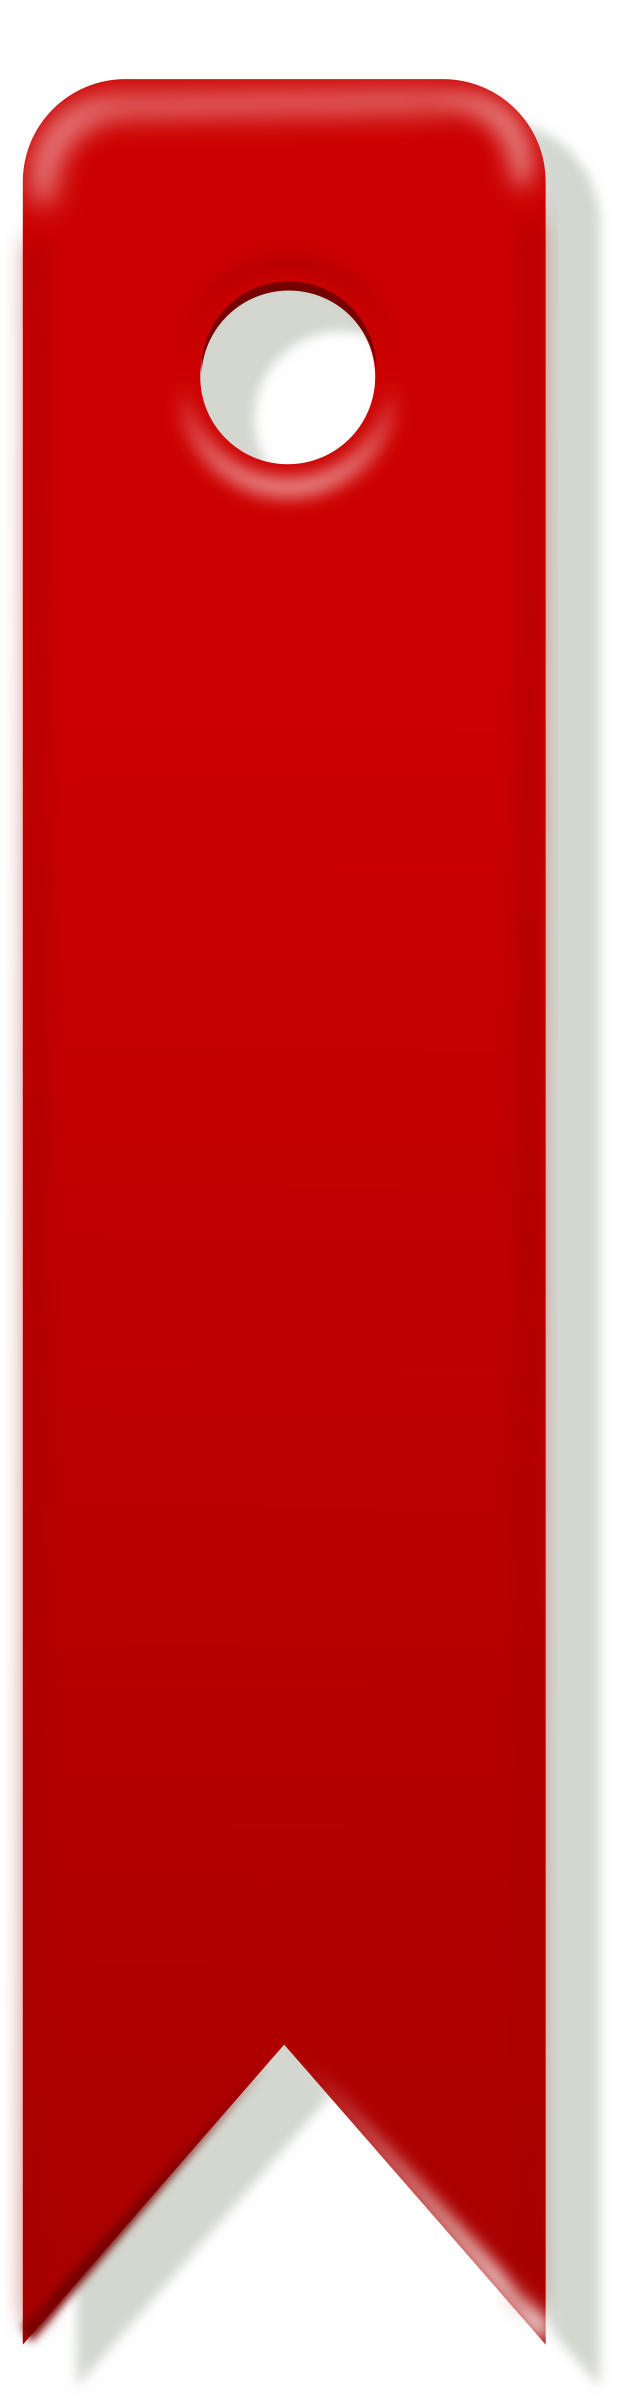 Clipart book red. Bookmark